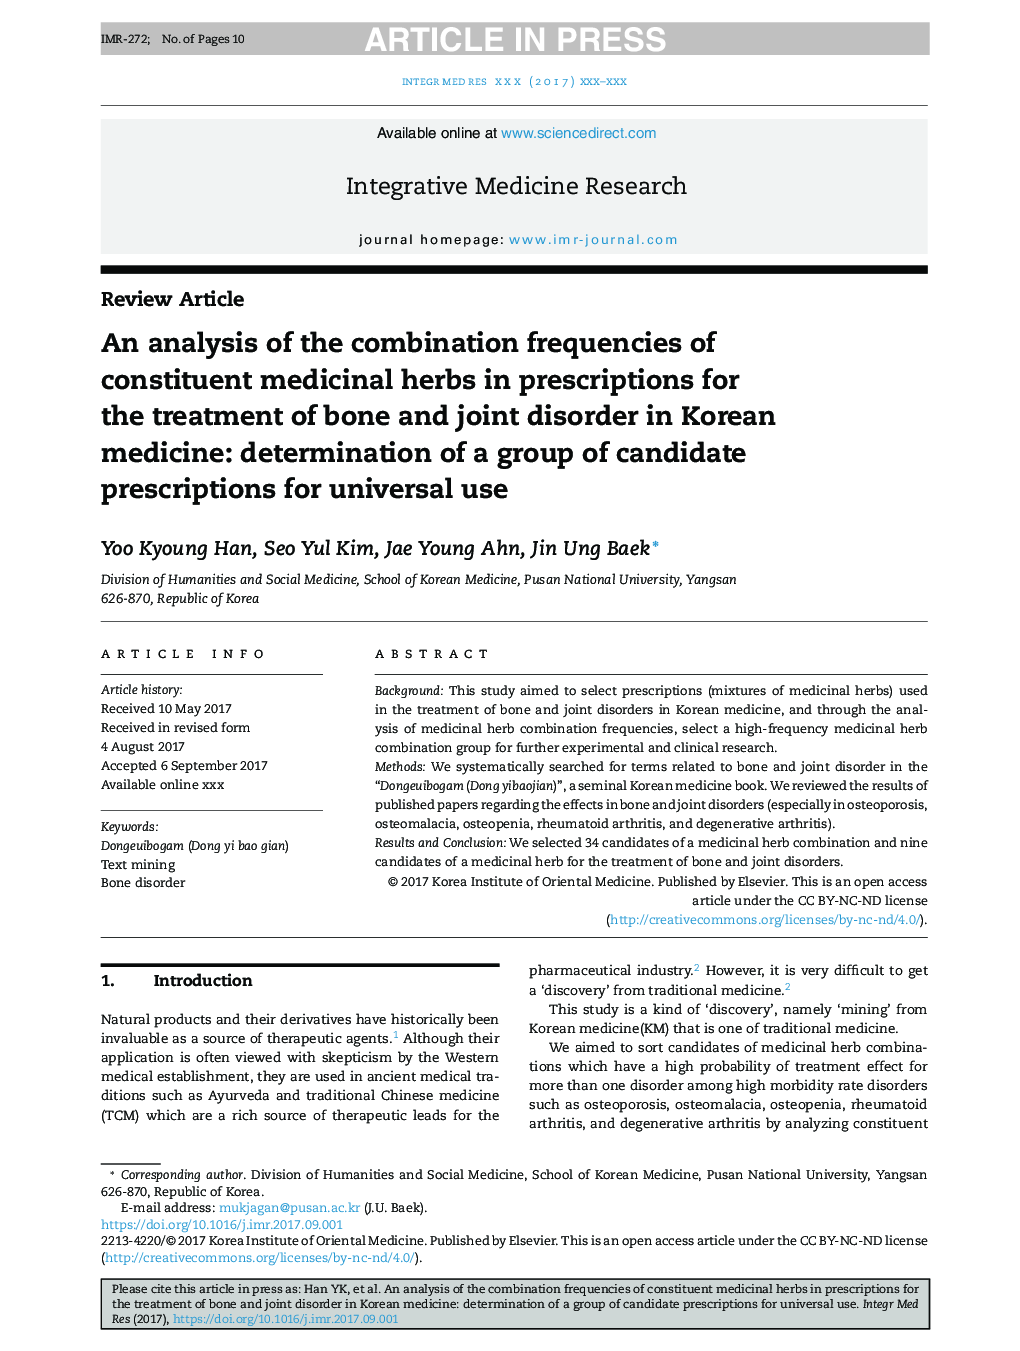 An analysis of the combination frequencies of constituent medicinal herbs in prescriptions for the treatment of bone and joint disorder in Korean medicine: determination of a group of candidate prescriptions for universal use